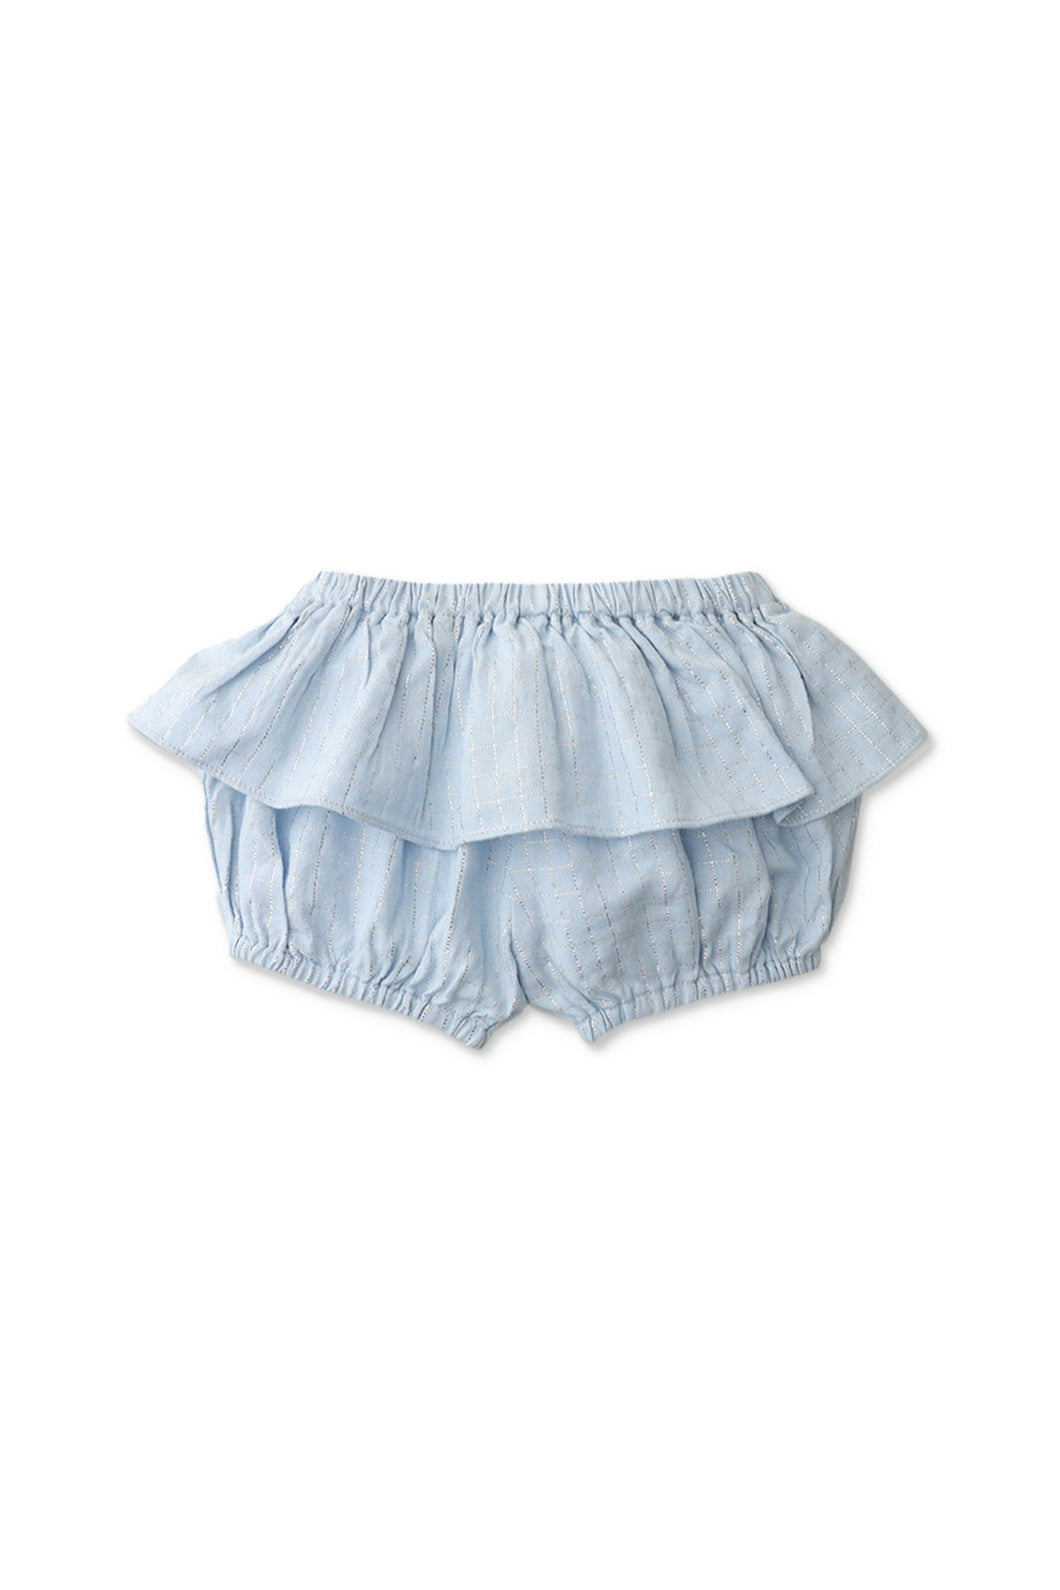 Gingersnaps Floral Printed Bloomers with Ruffles